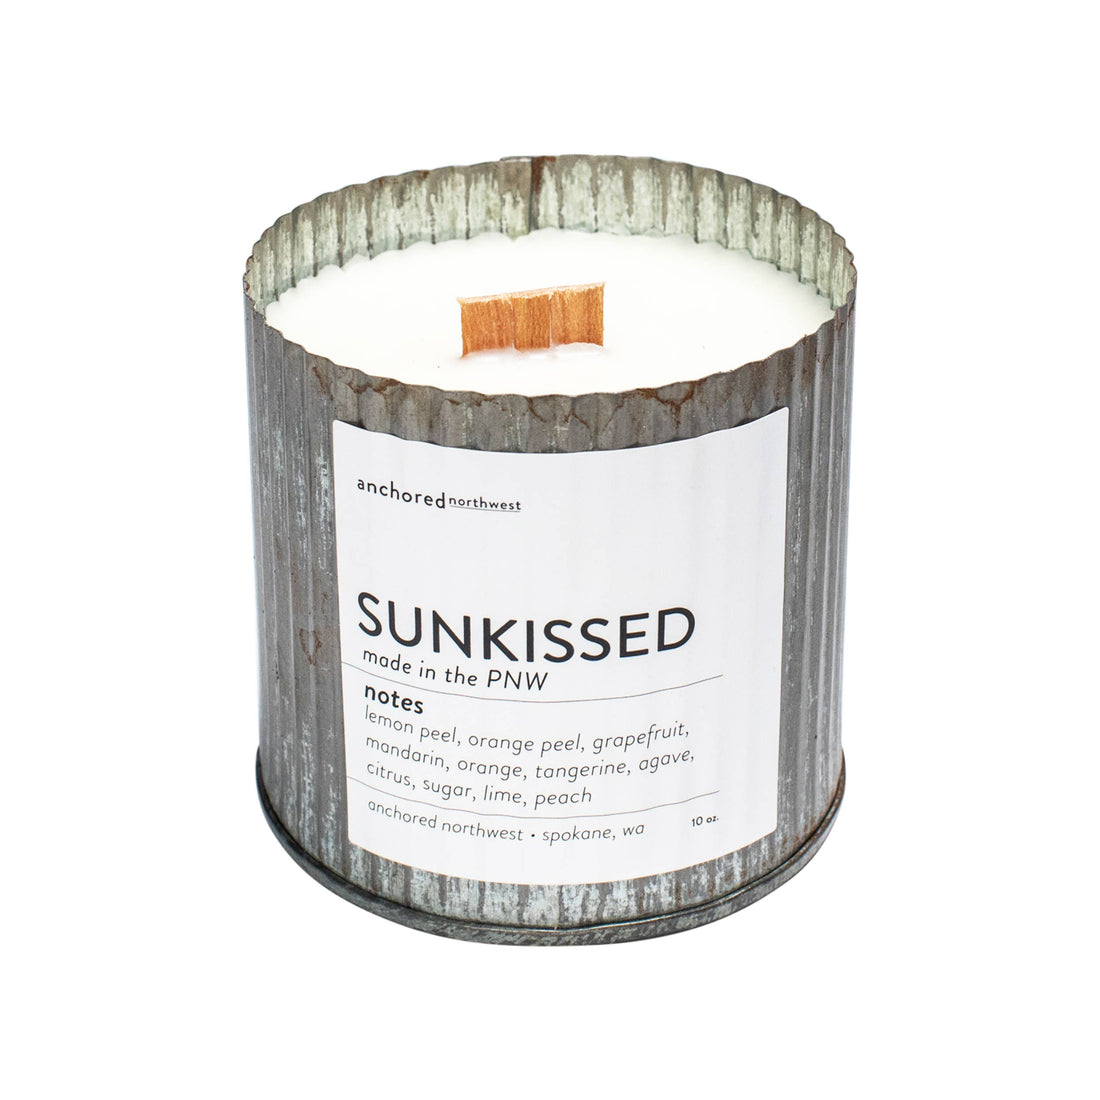 Sunkissed Wood Wick Rustic Farmhouse Soy Candle